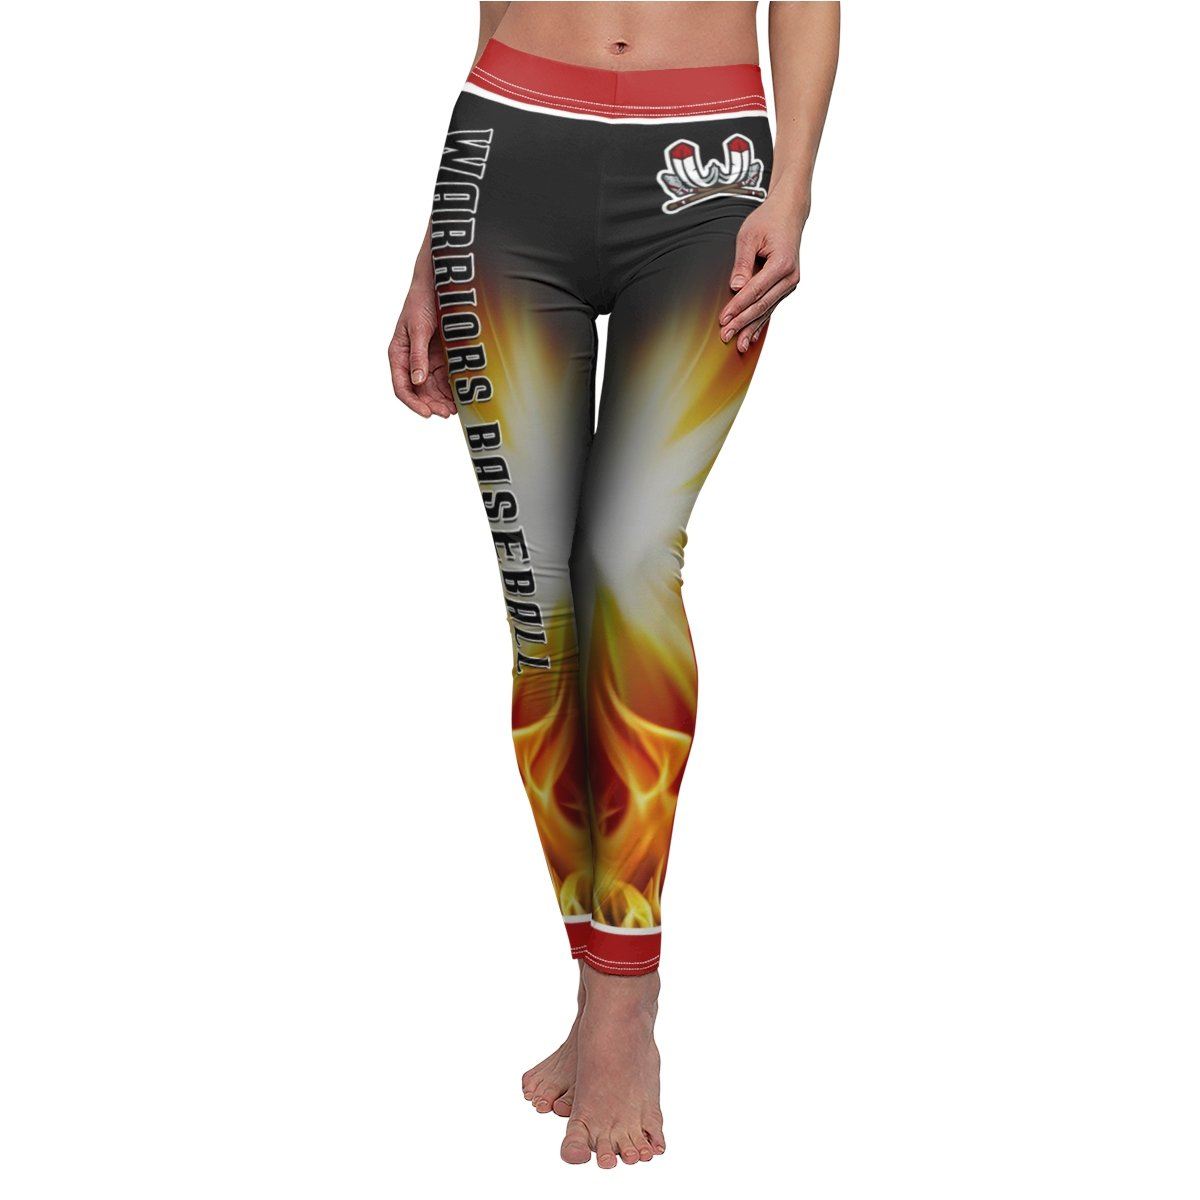 Burn - V.1 - Extreme Sportswear Cut & Sew Leggings Template-Photoshop Template - Photo Solutions